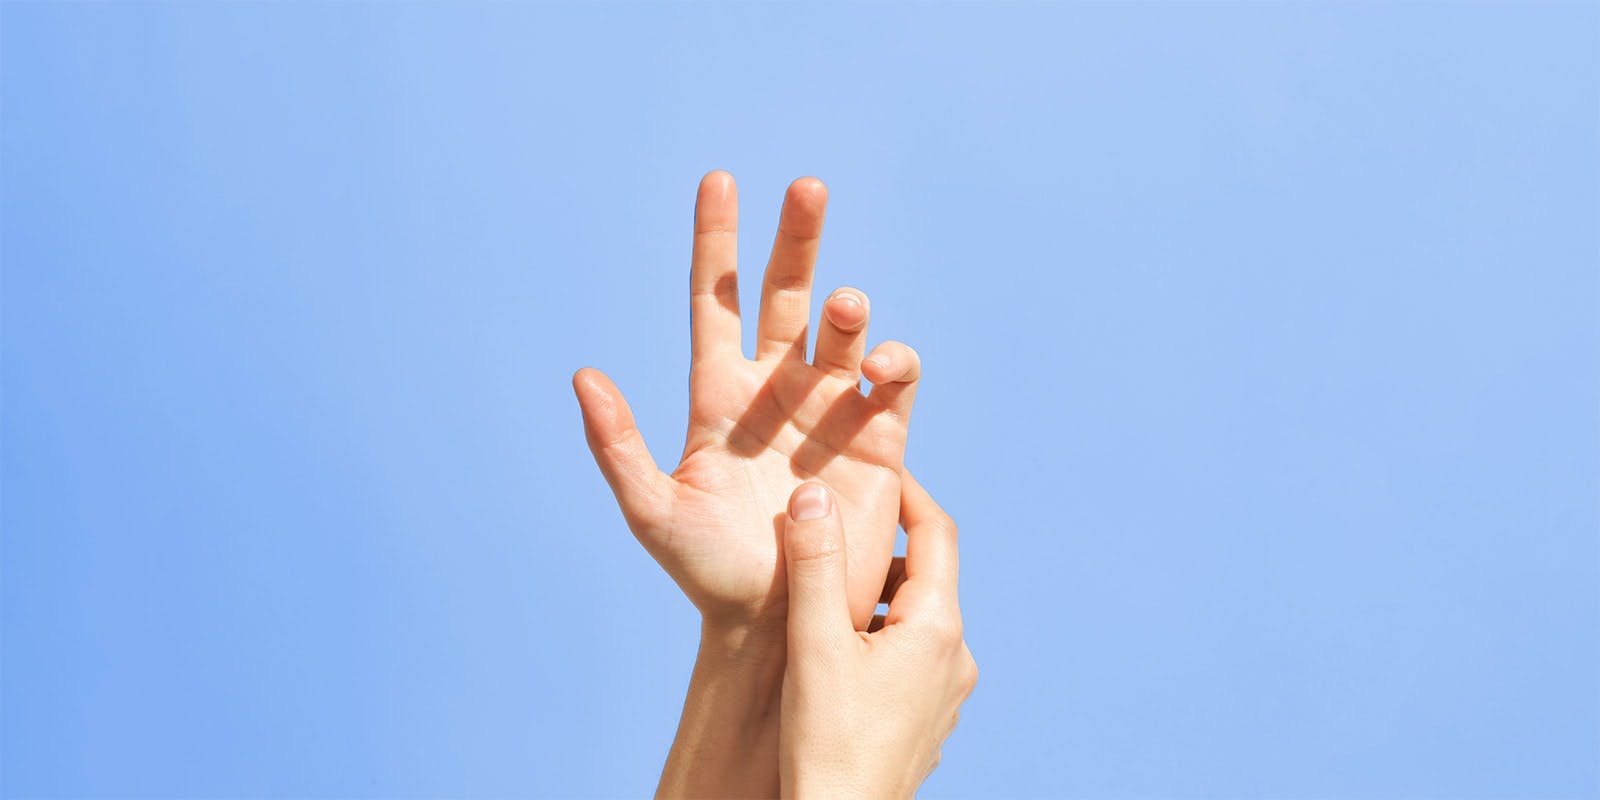 Two hands in the air, the right caressing the left, with the left's palm facing the camera.